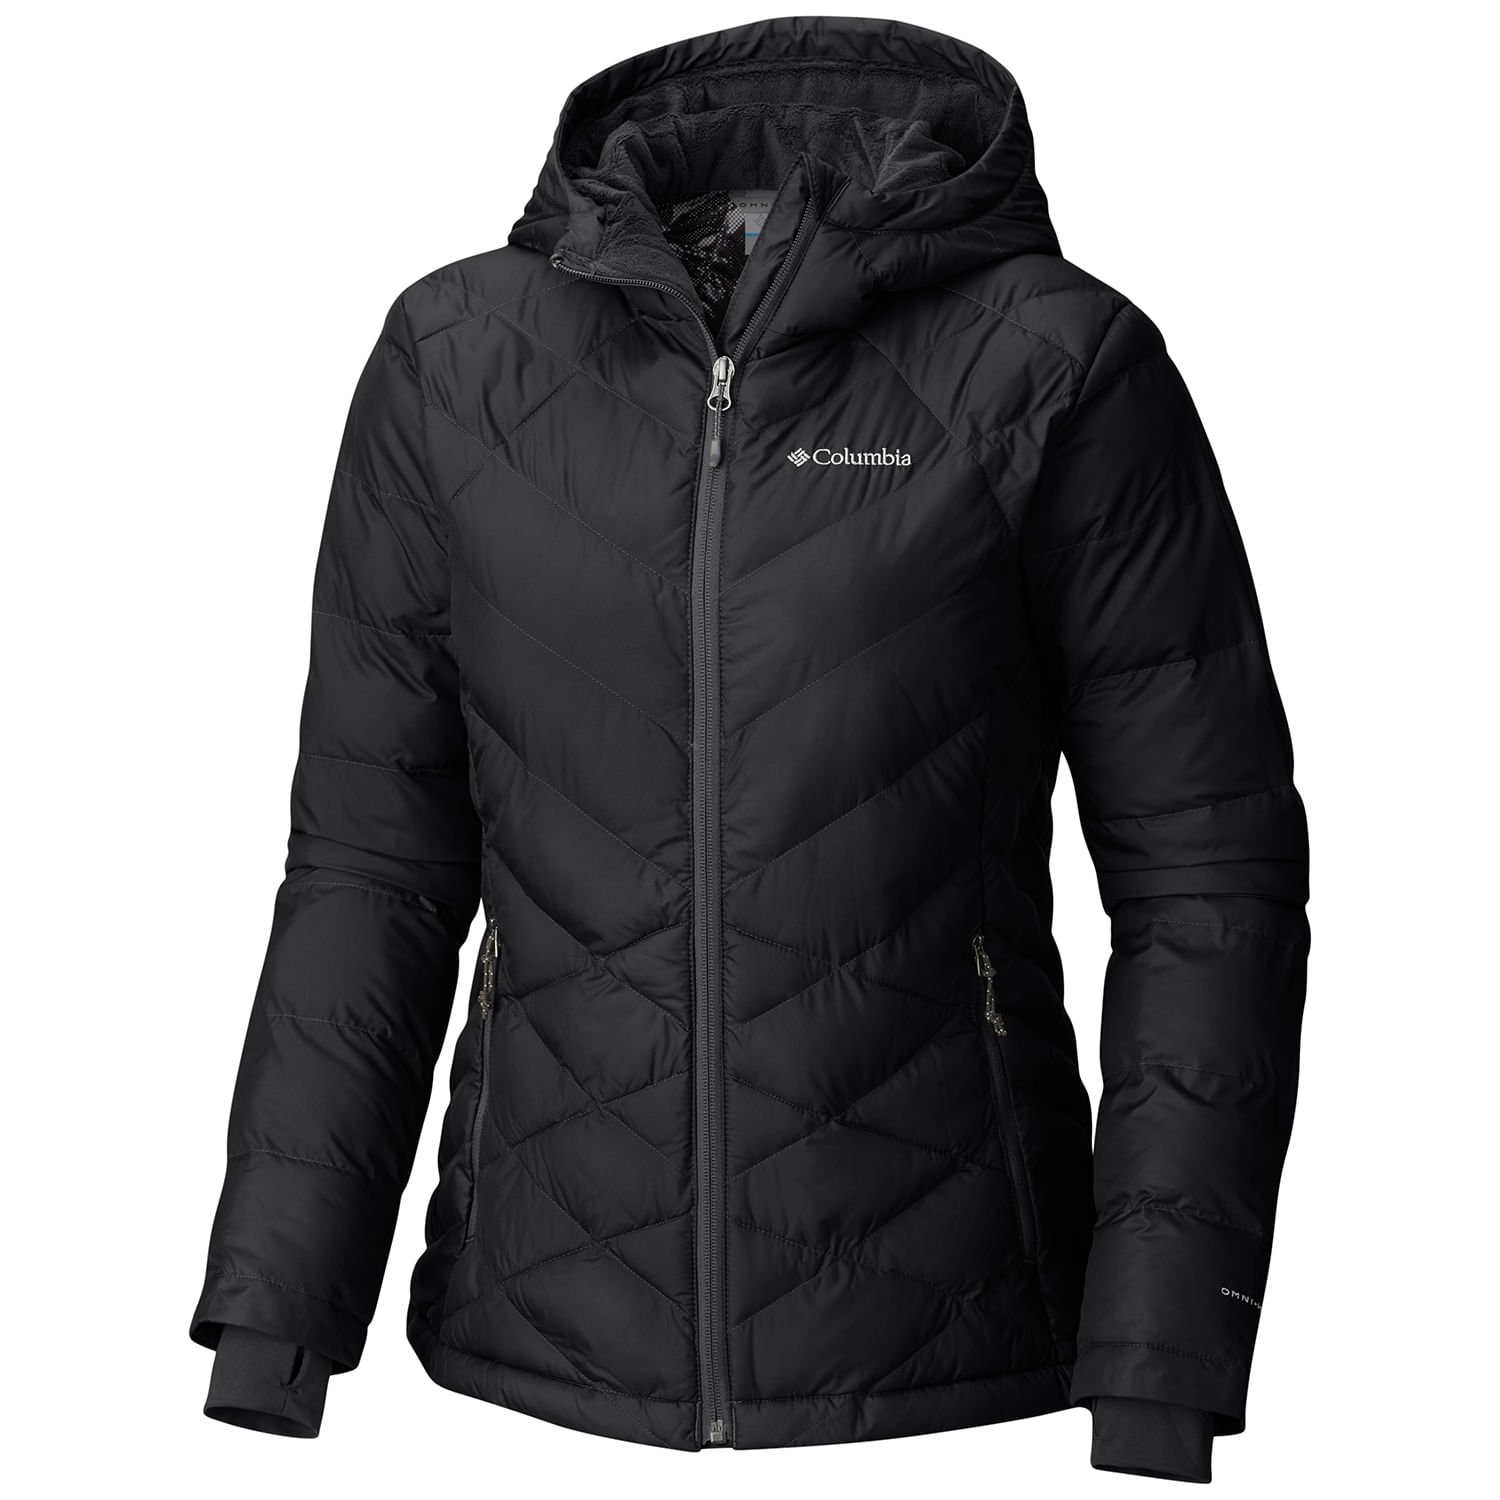 Parka Mujer Heavenly Hdd Negro Columbia